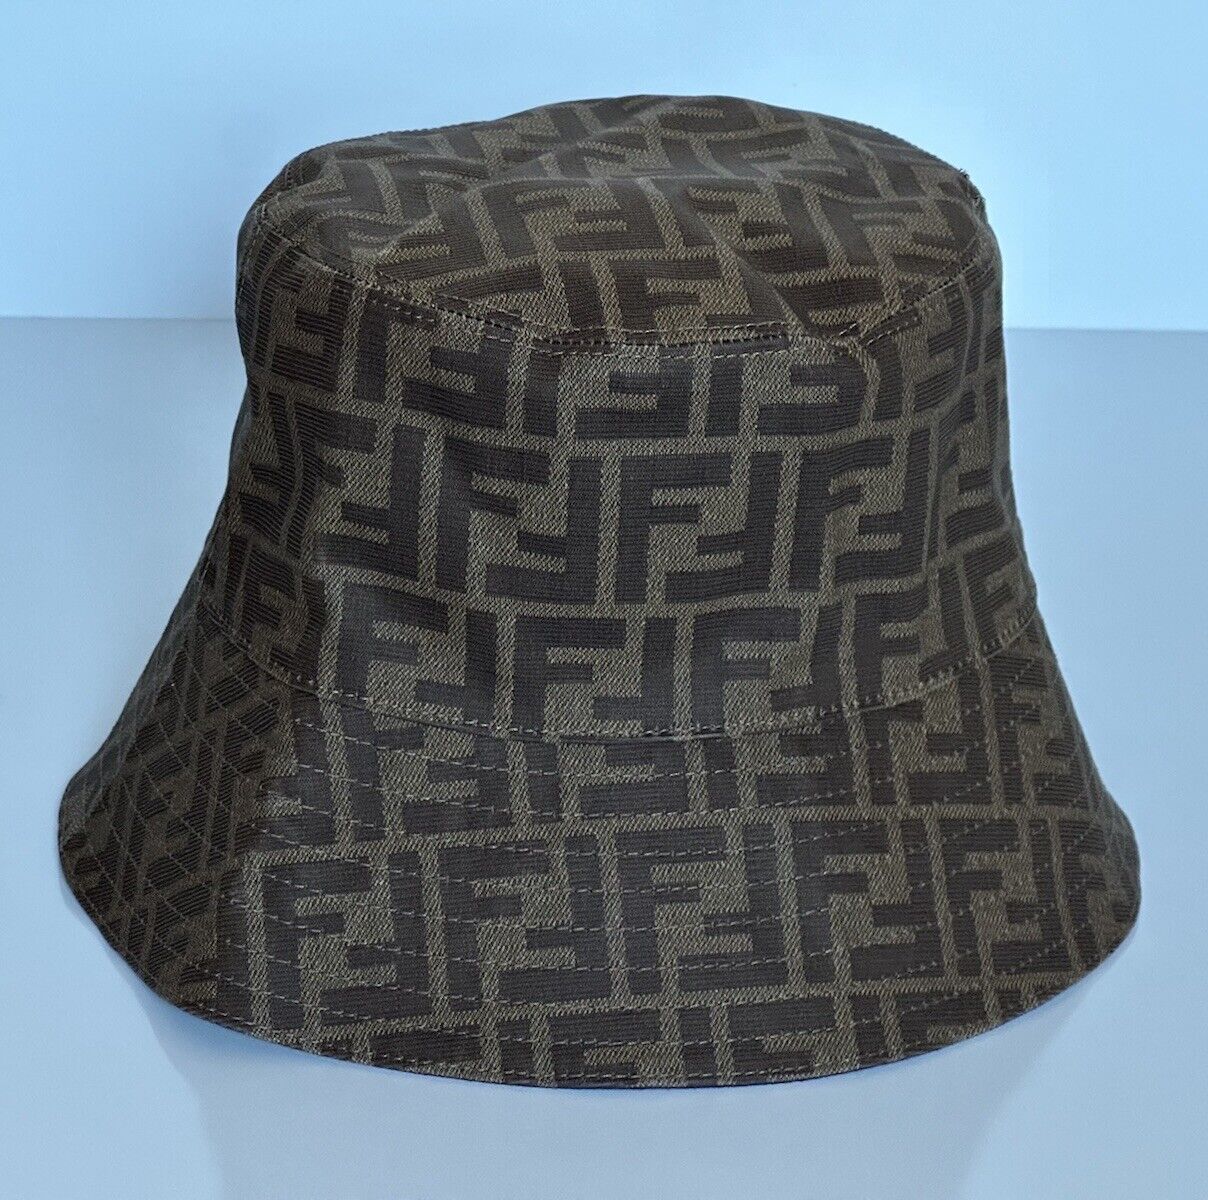 NWT $520 Fendi FF Woven Fabric Brown Bucket Hat Made in Italy Large FXQ200